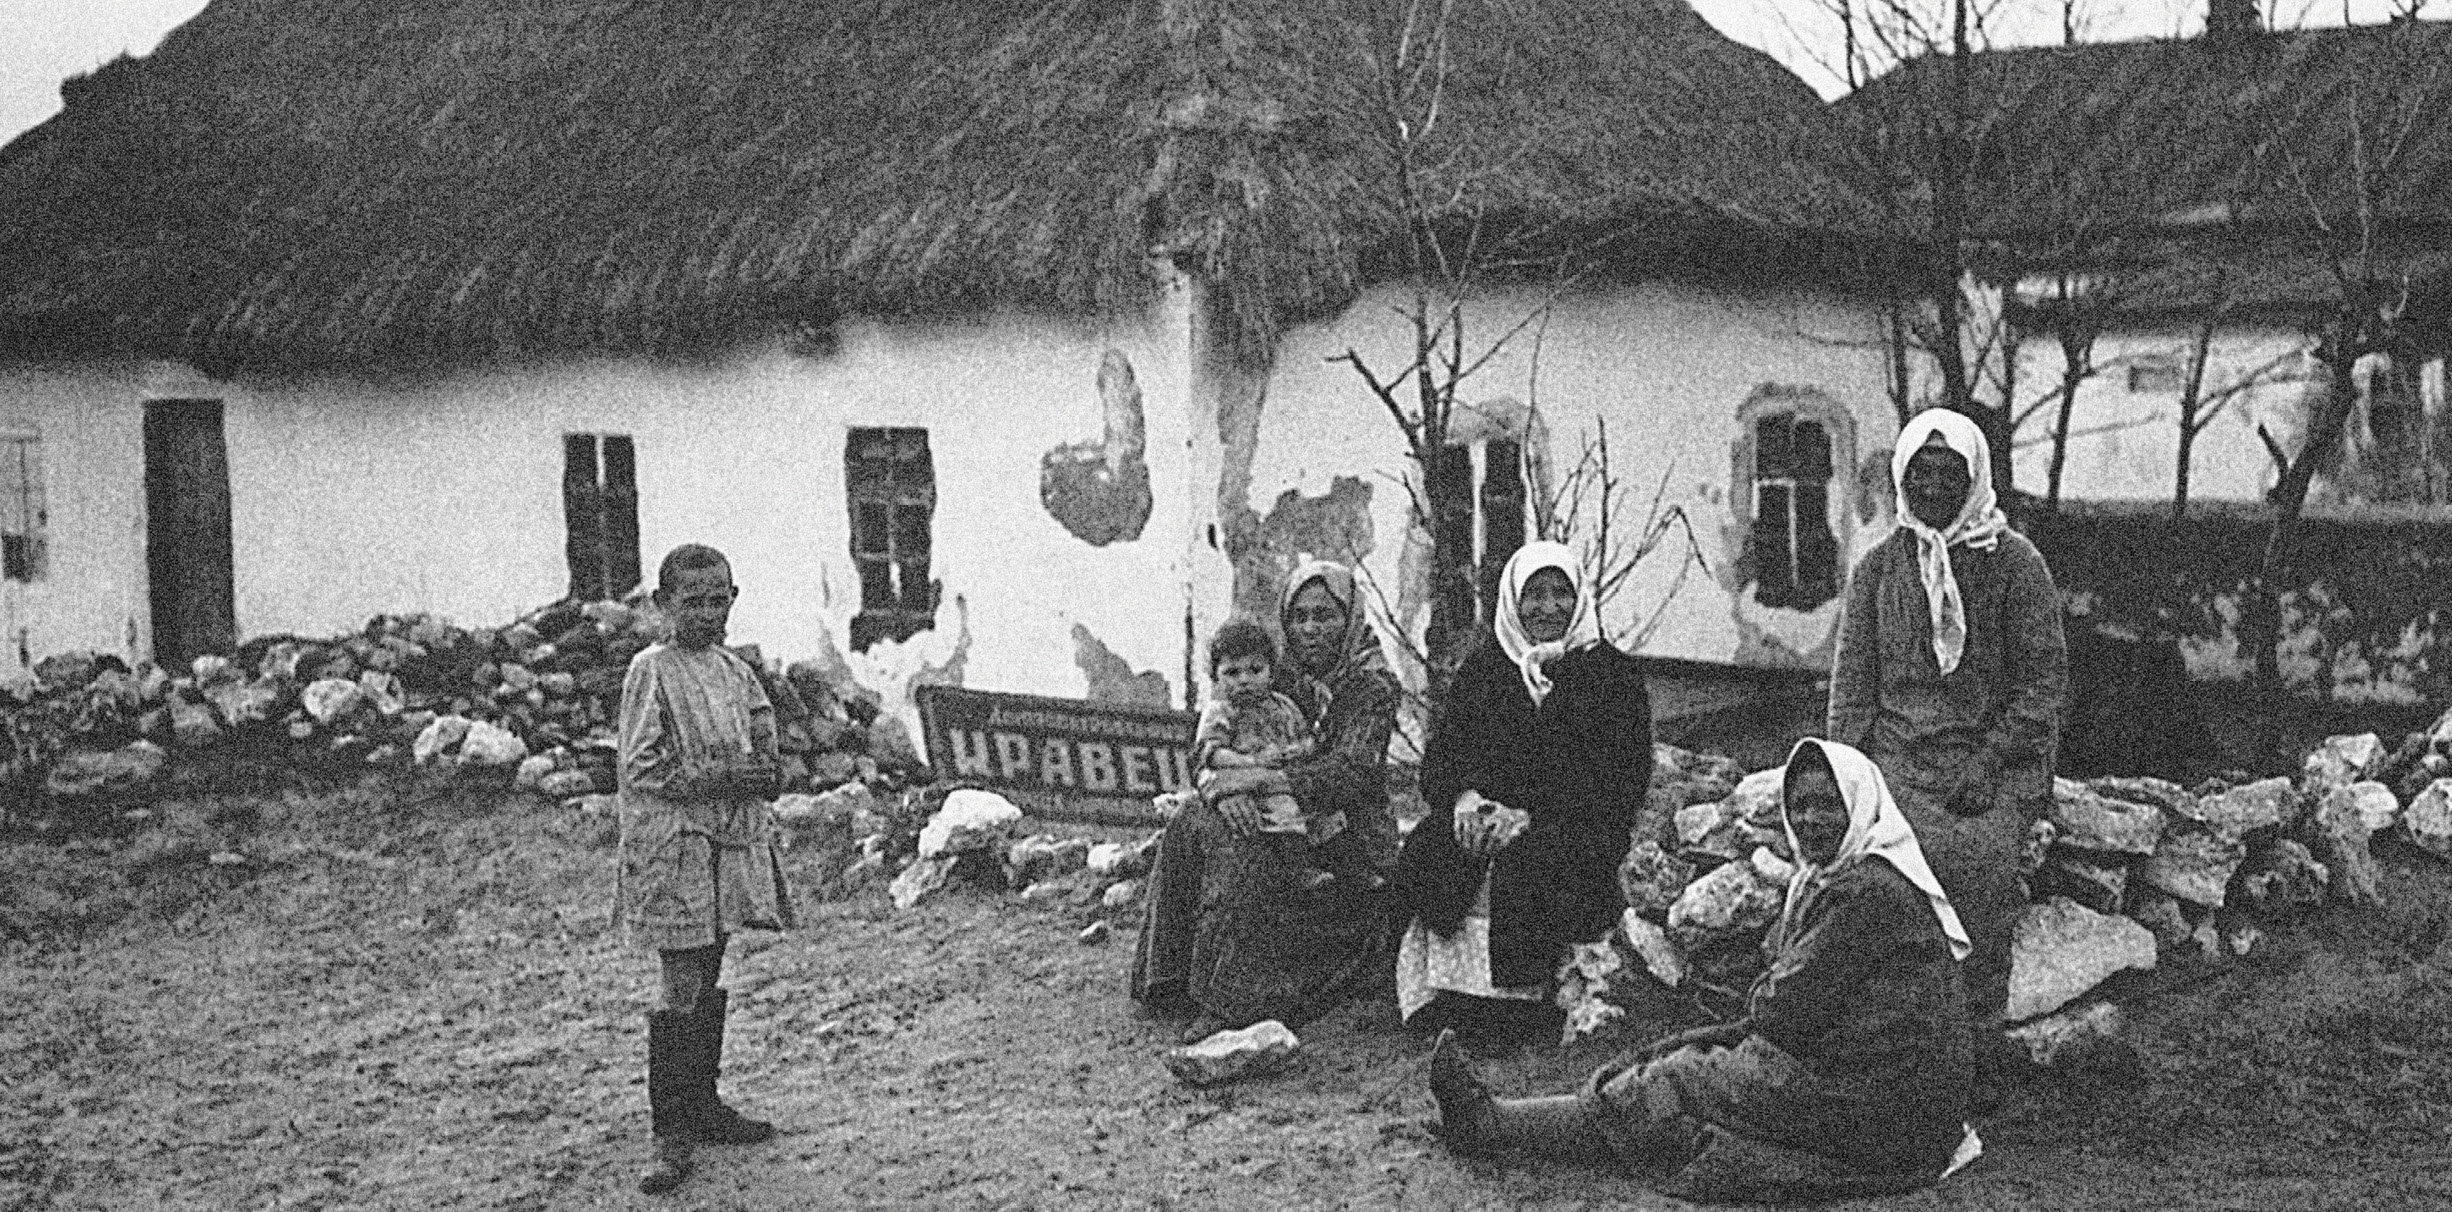 THE DISPOSSESSED KULAKS in front of their confiscated home, Ukraine. 